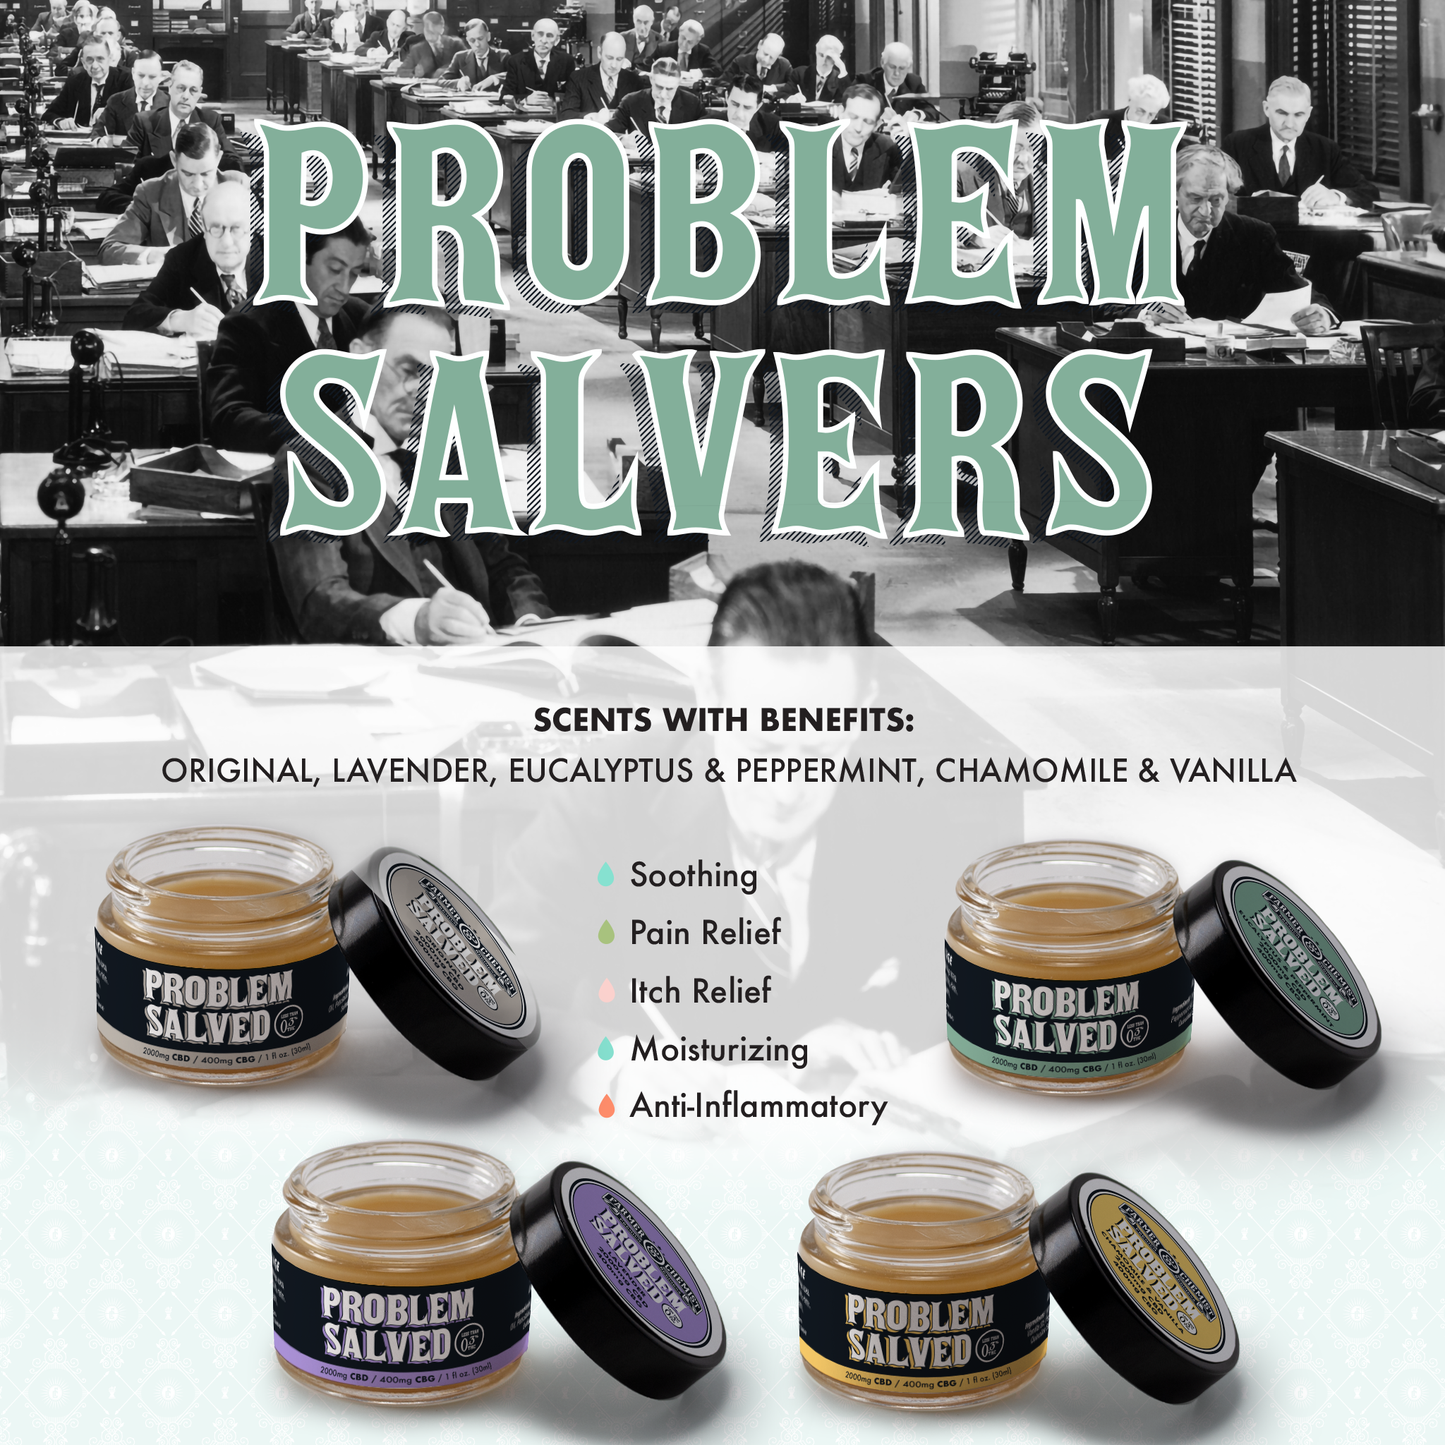 PROBLEM SALVED - 1oz. 2000mg with Eucalyptus and Peppermint (Case pack of 4)